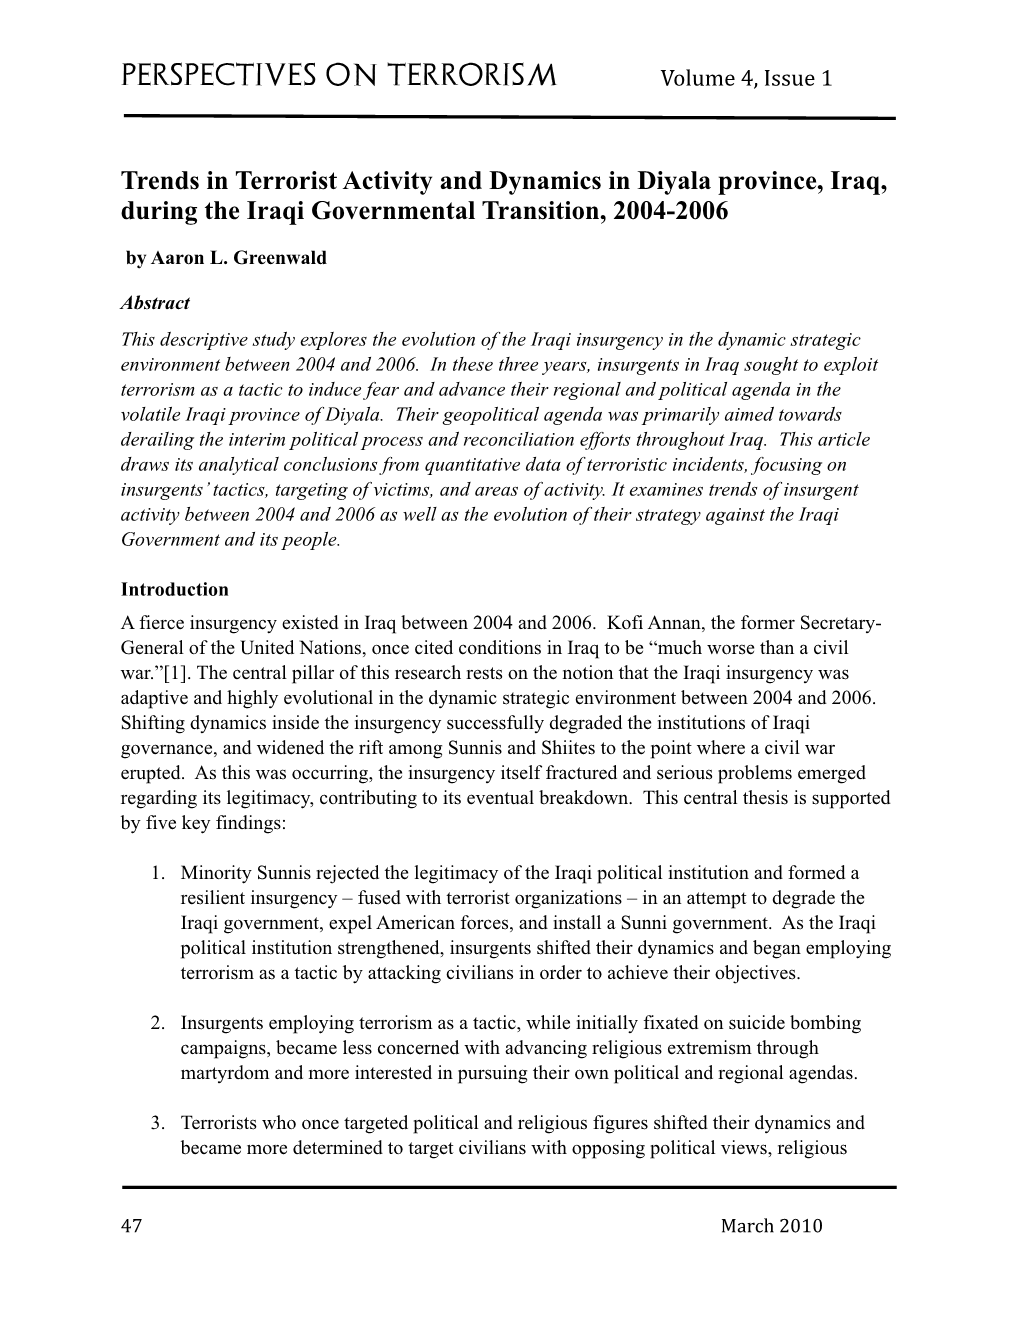 Trends in Terrorist Activity and Dynamics in Diyala Province, Iraq, During the Iraqi Governmental Transition, 2004-2006